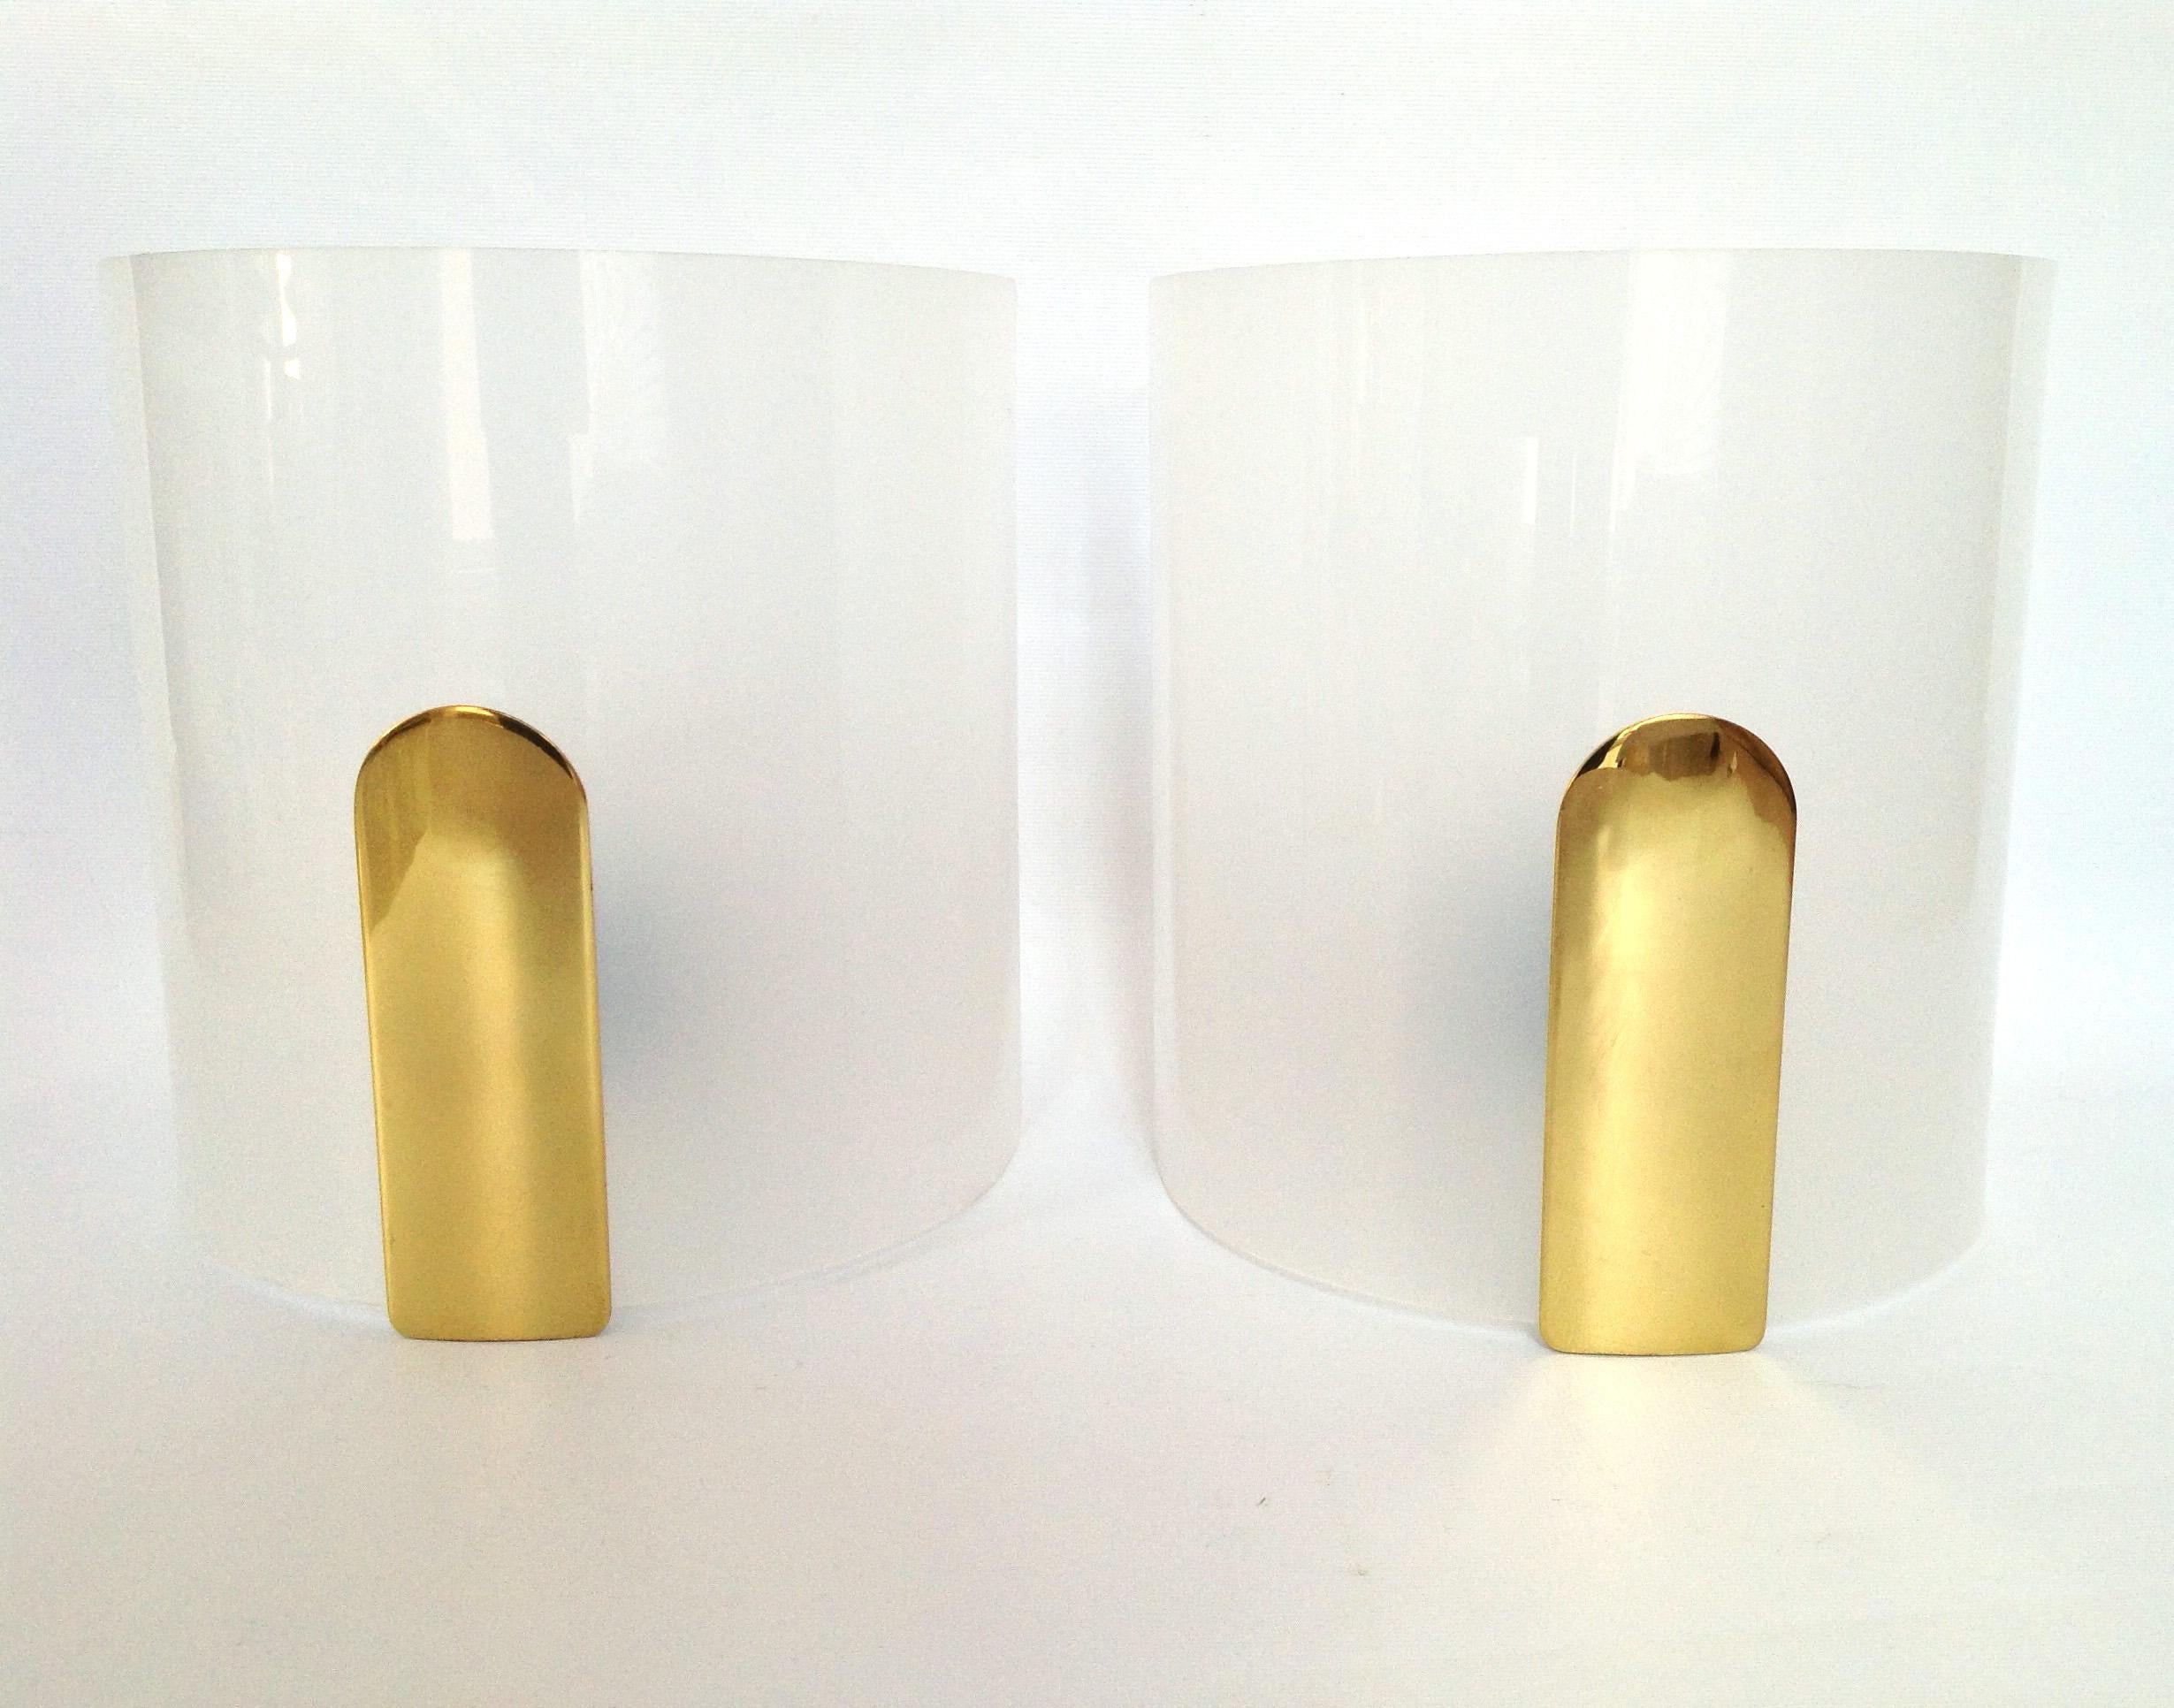 Spanish Pair of Postmodern Lucite Brass Wall Lights by Metalarte, 1980s For Sale